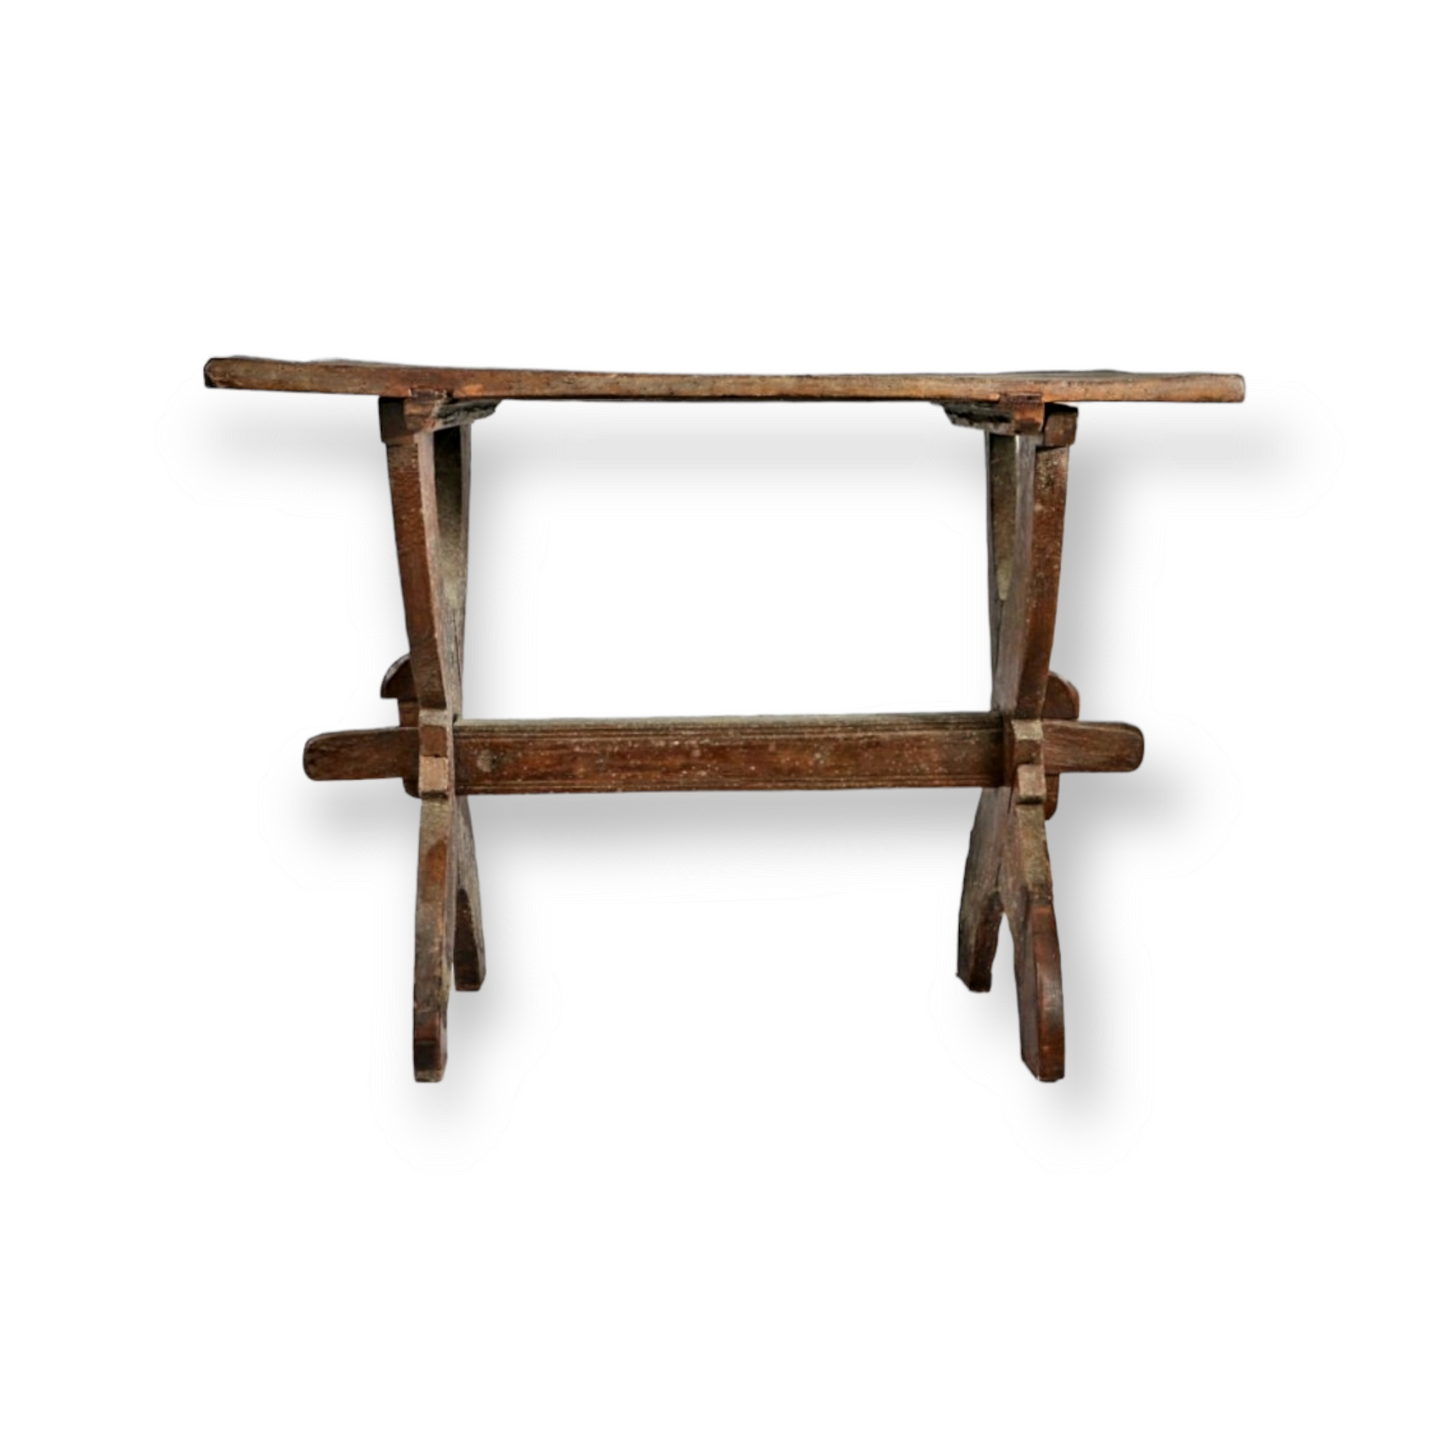 A Rustic 19th Century English Antique Tavern Table